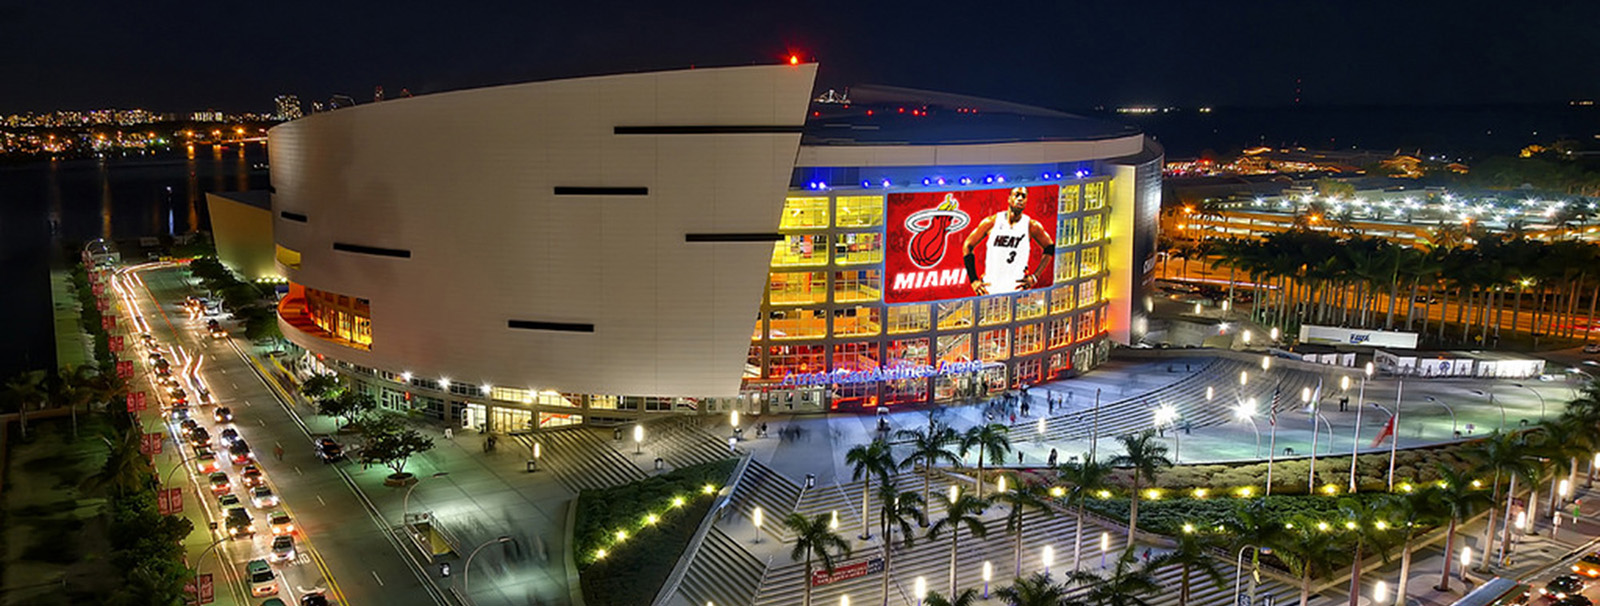 American-Airlines-Arena